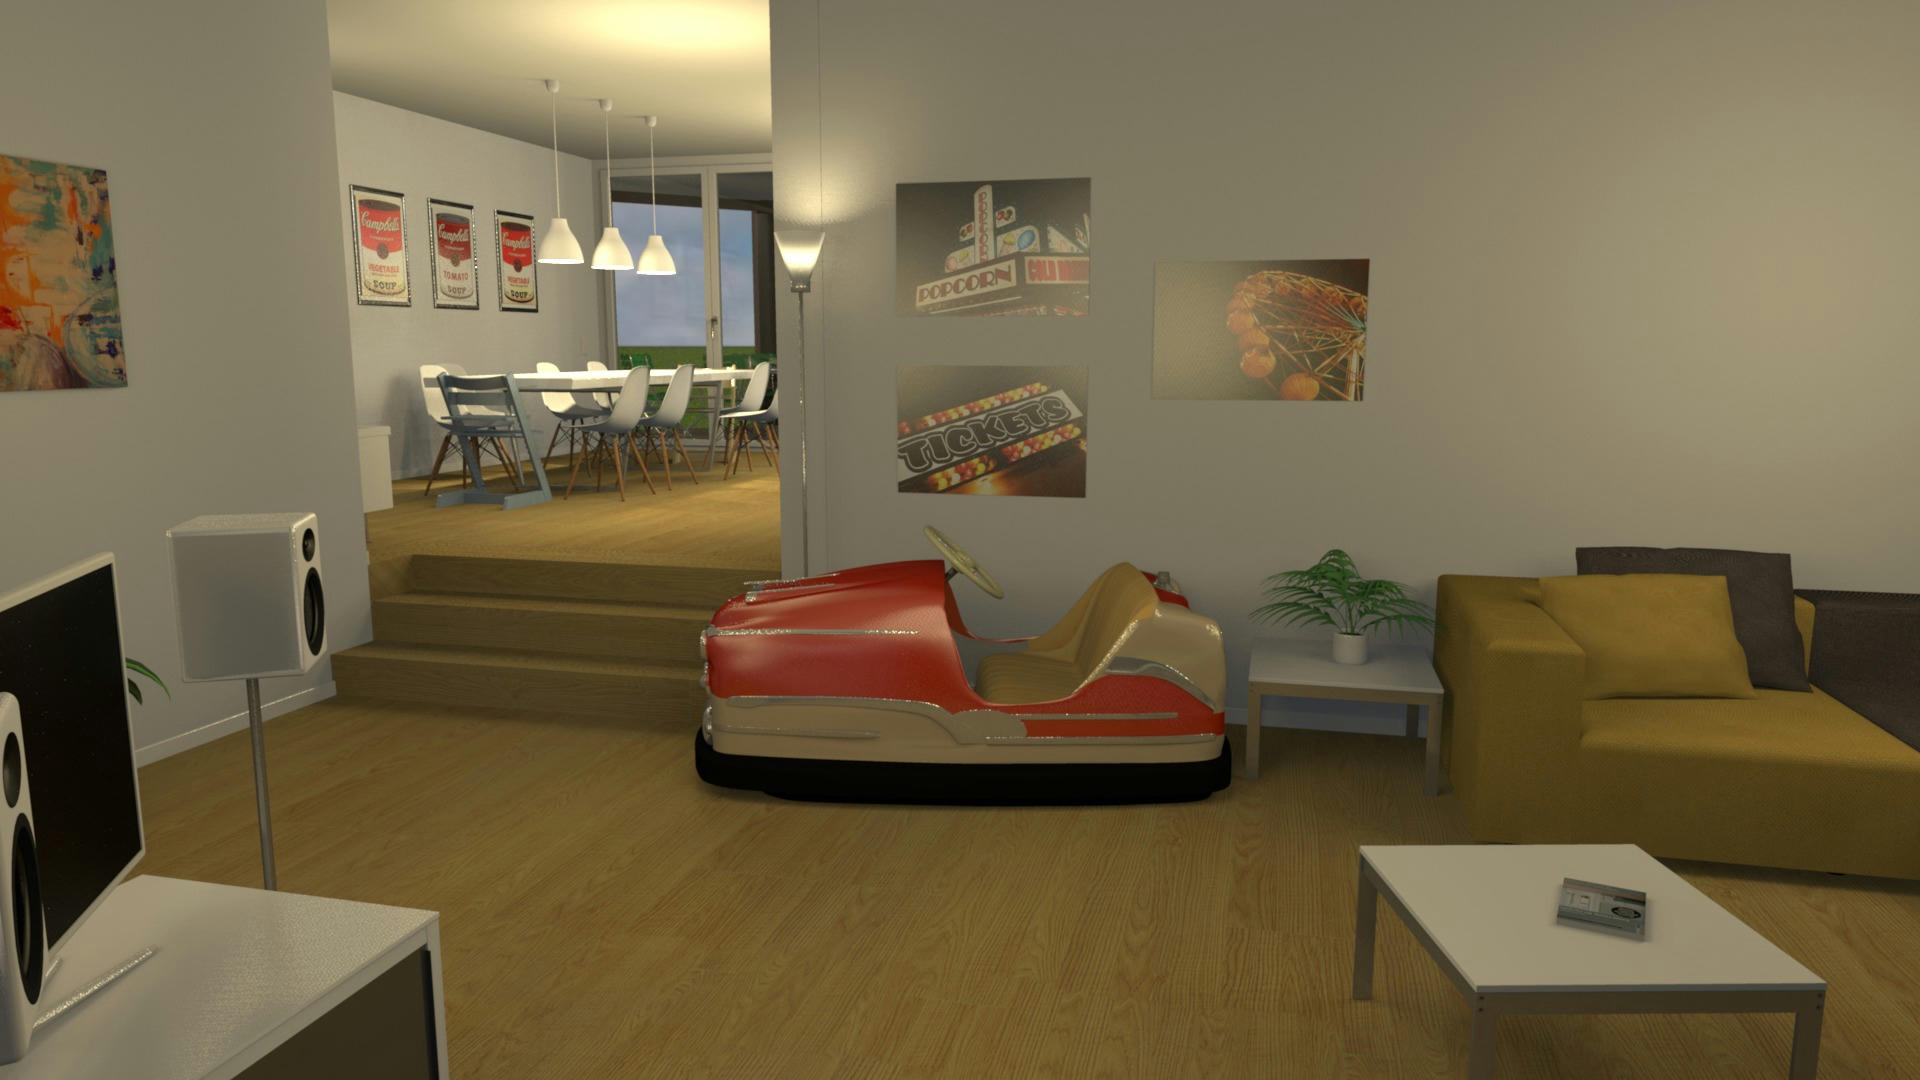 Sweet Home 3D Forum - View Thread - Flat Is About to Become Reality